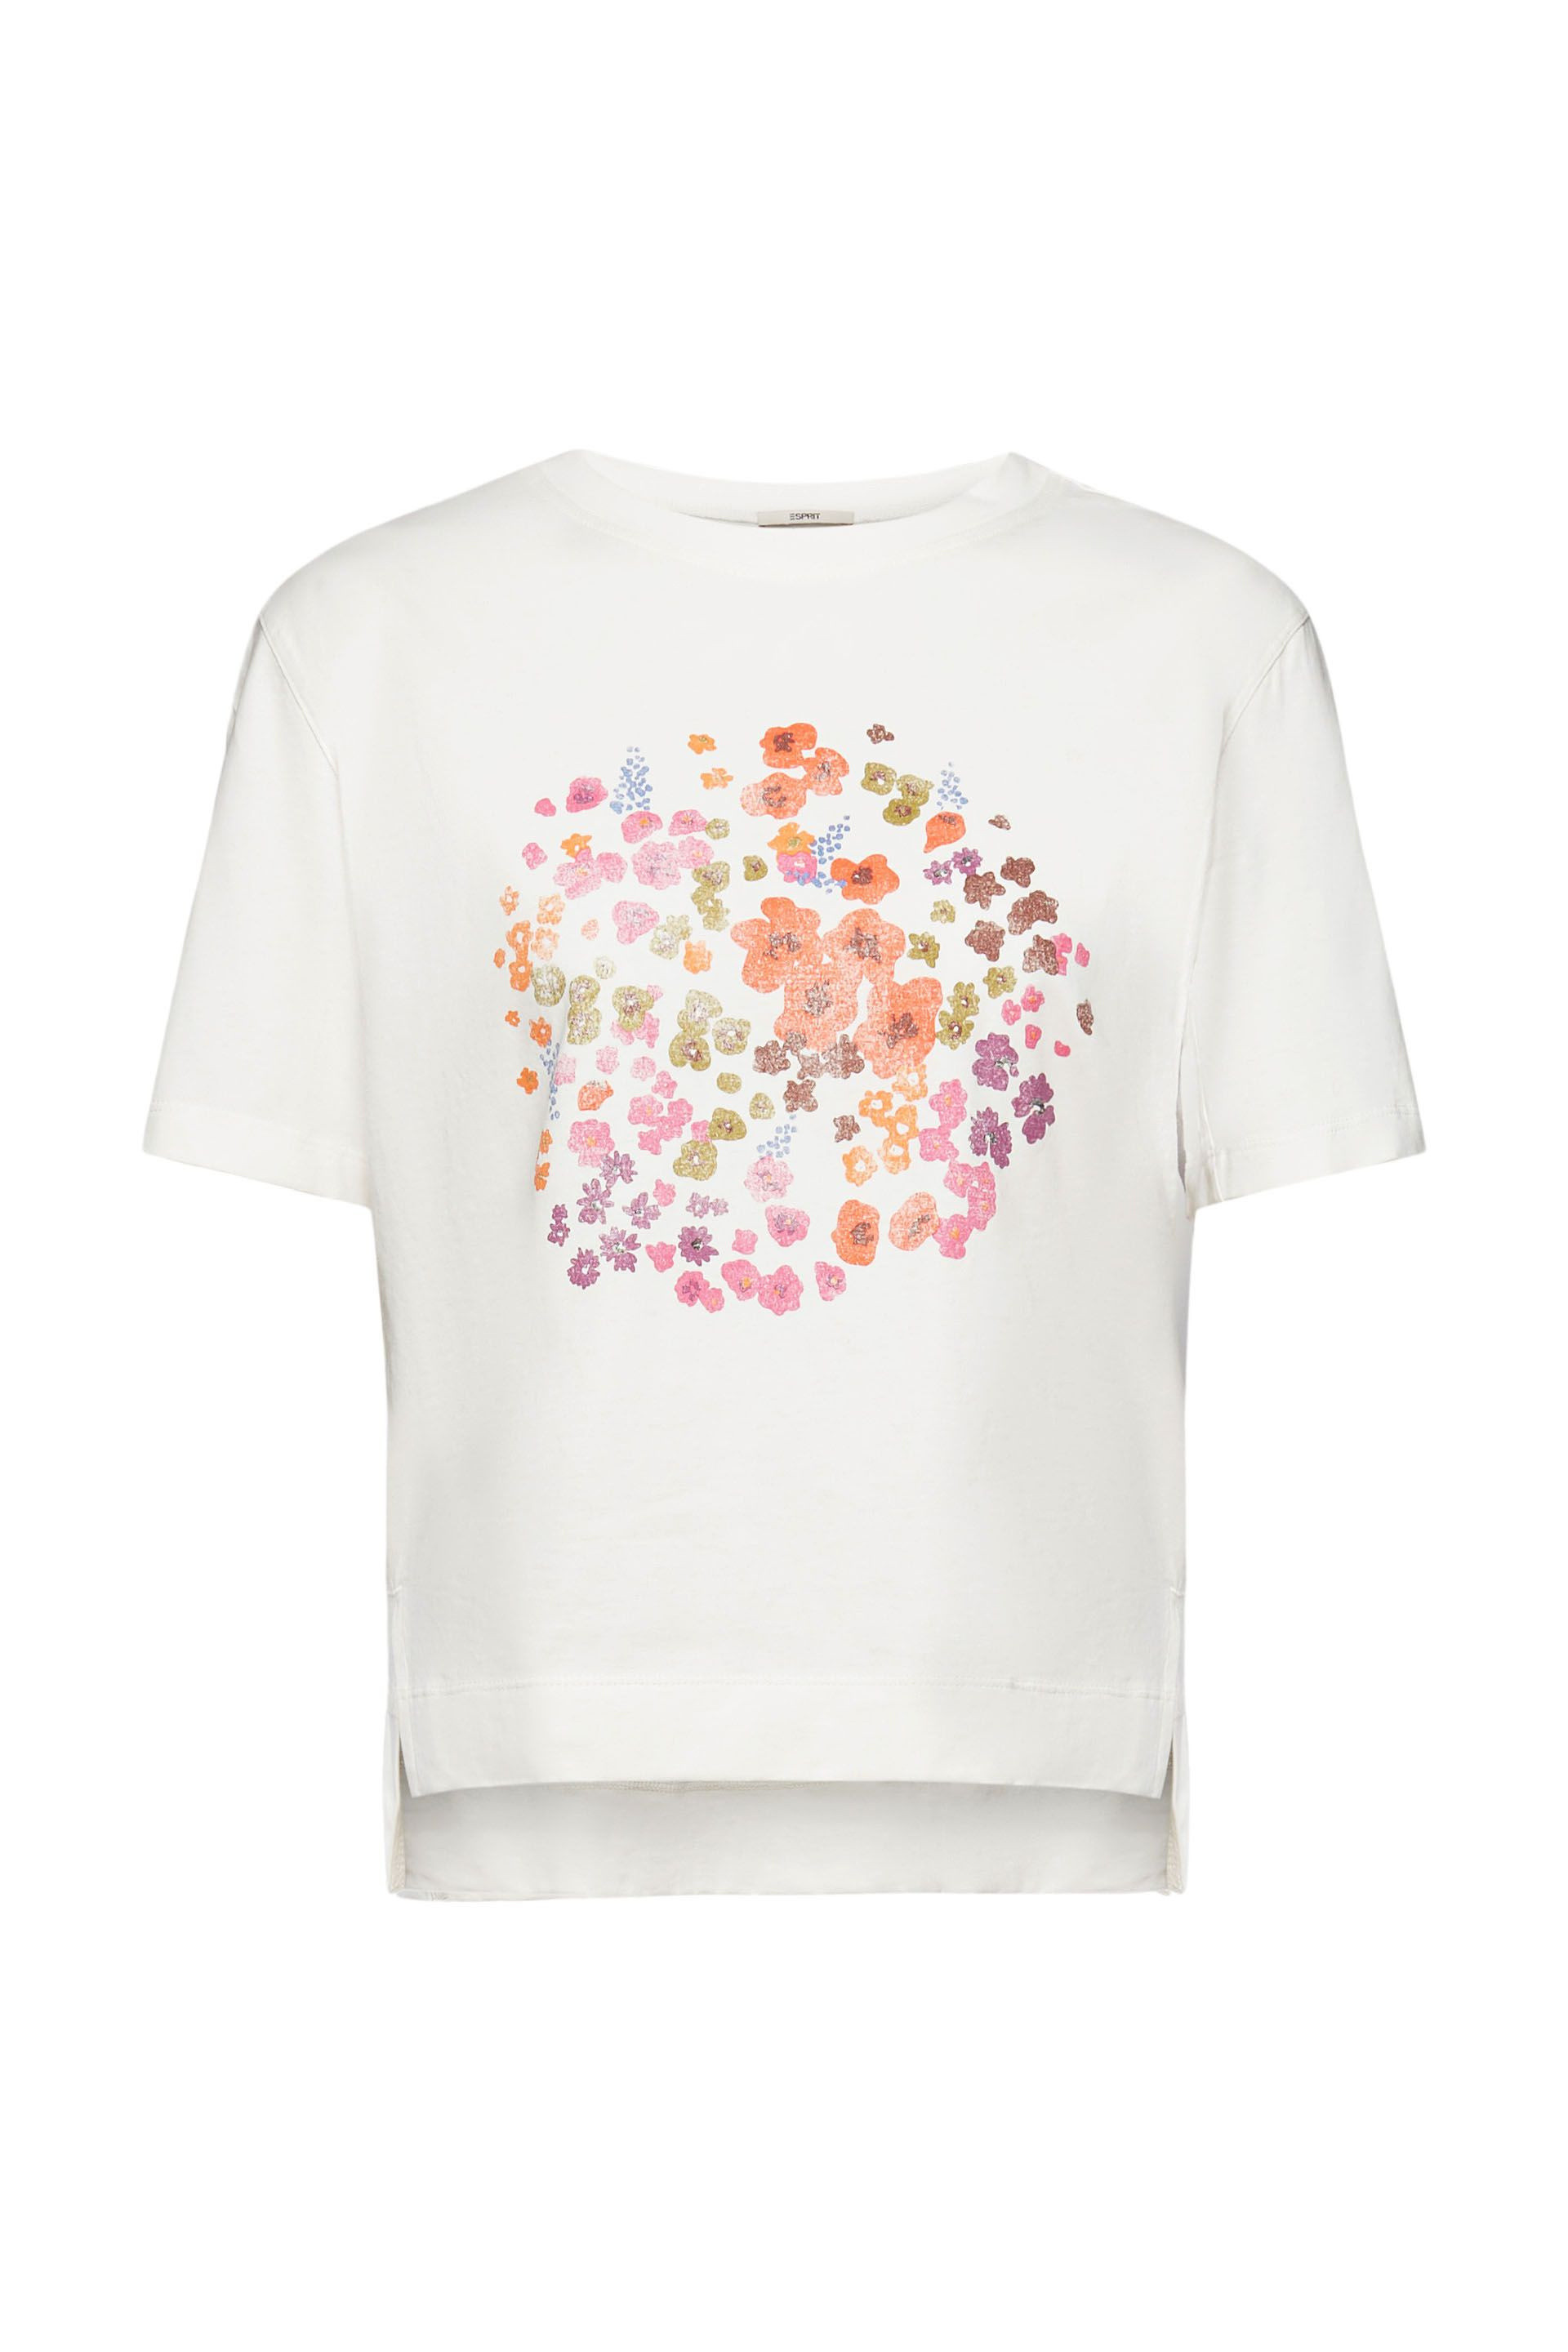 Esprit - T-shirt with floral print, White, large image number 0